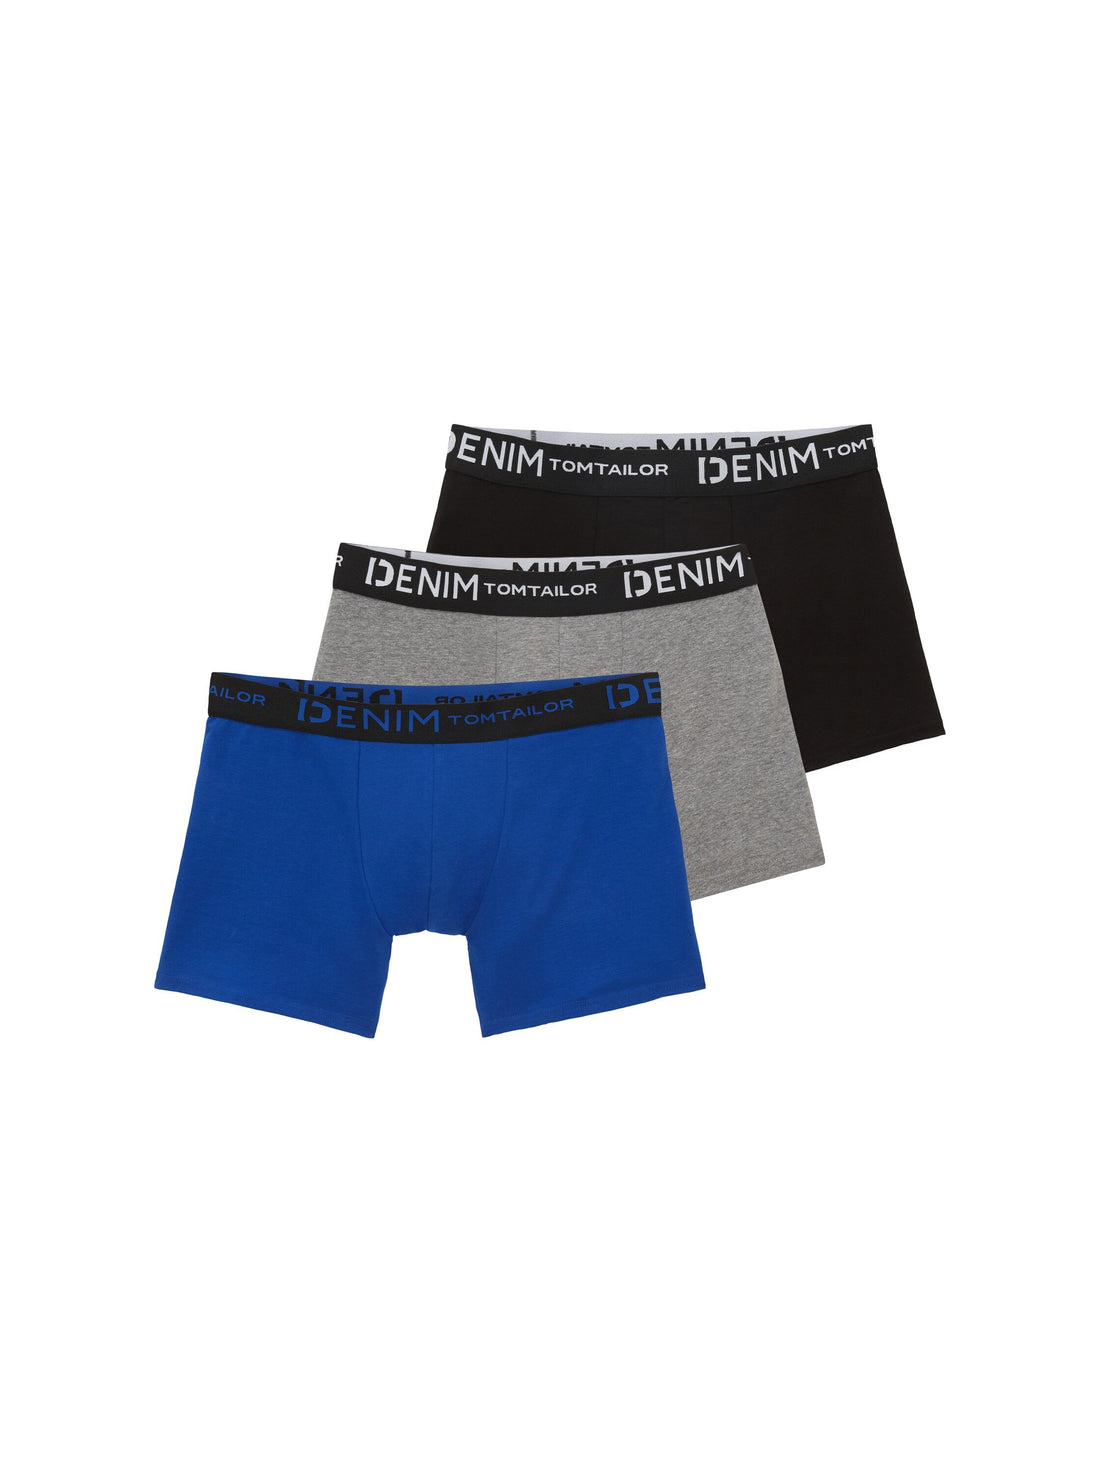 3 Pack Multi Color Boxers_1038850_14531_01